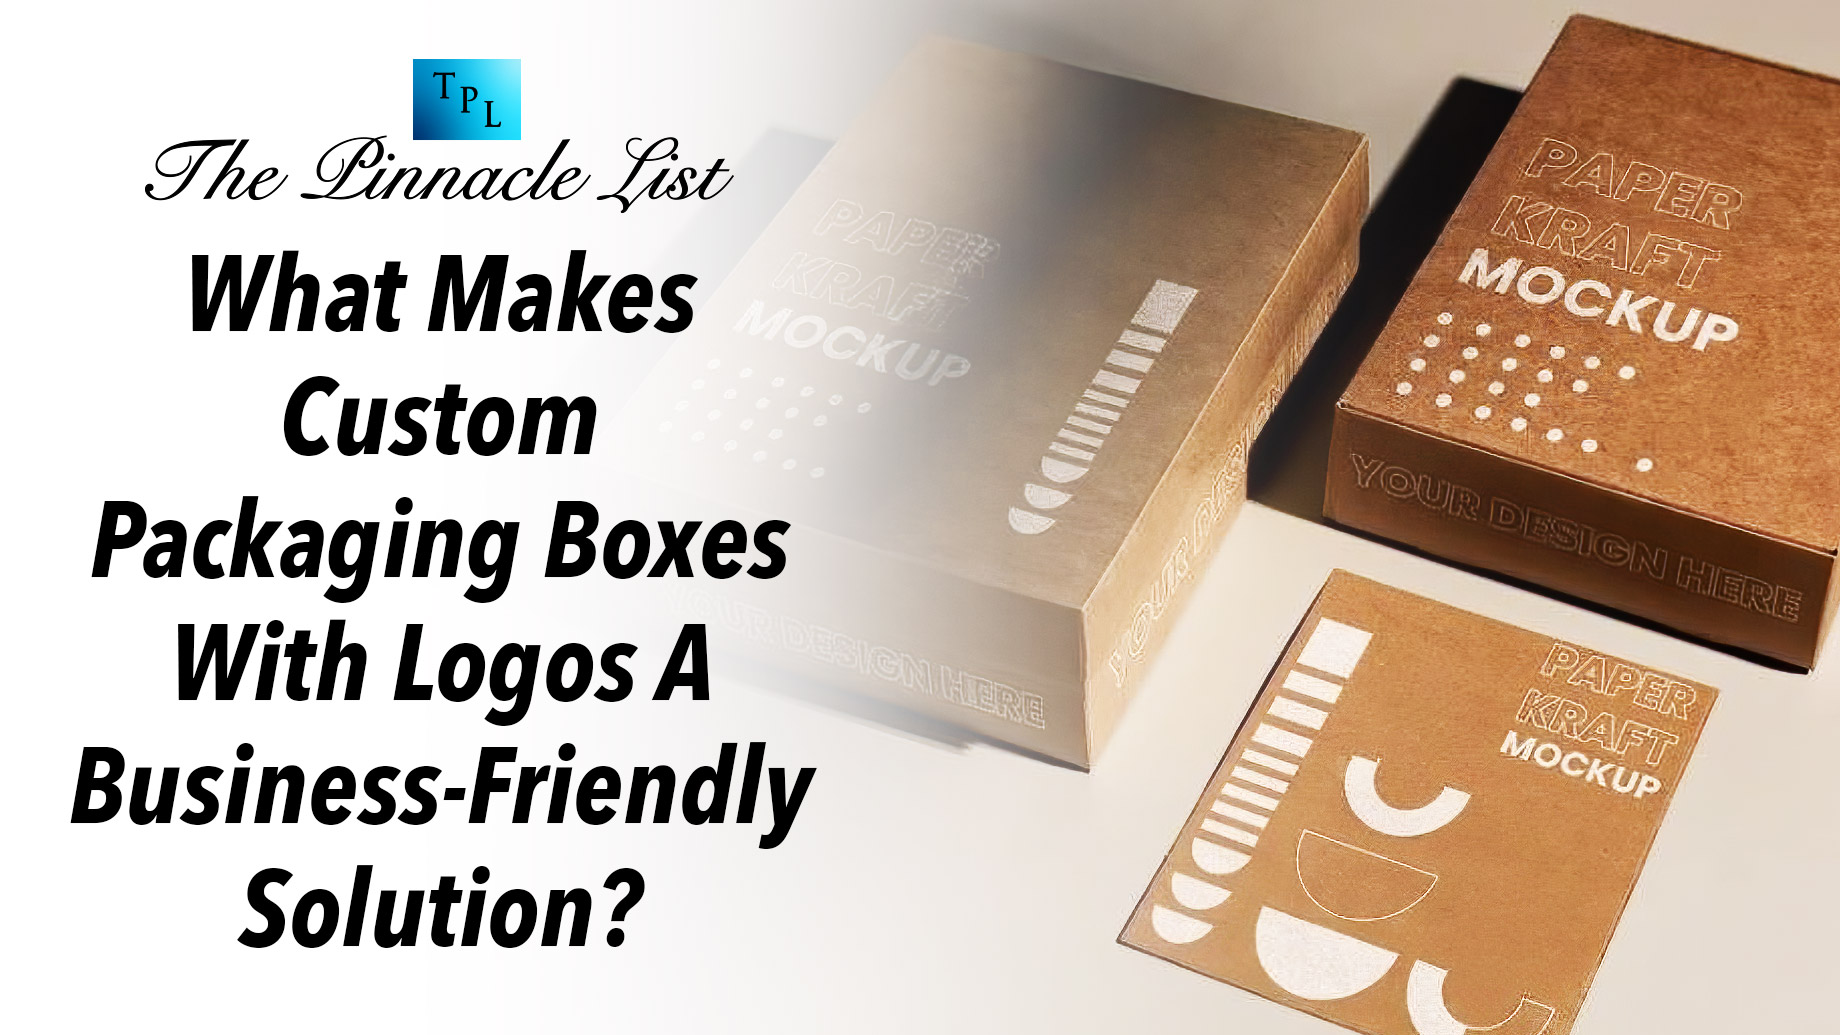 What Makes Custom Packaging Boxes With Logos A Business-Friendly Solution?